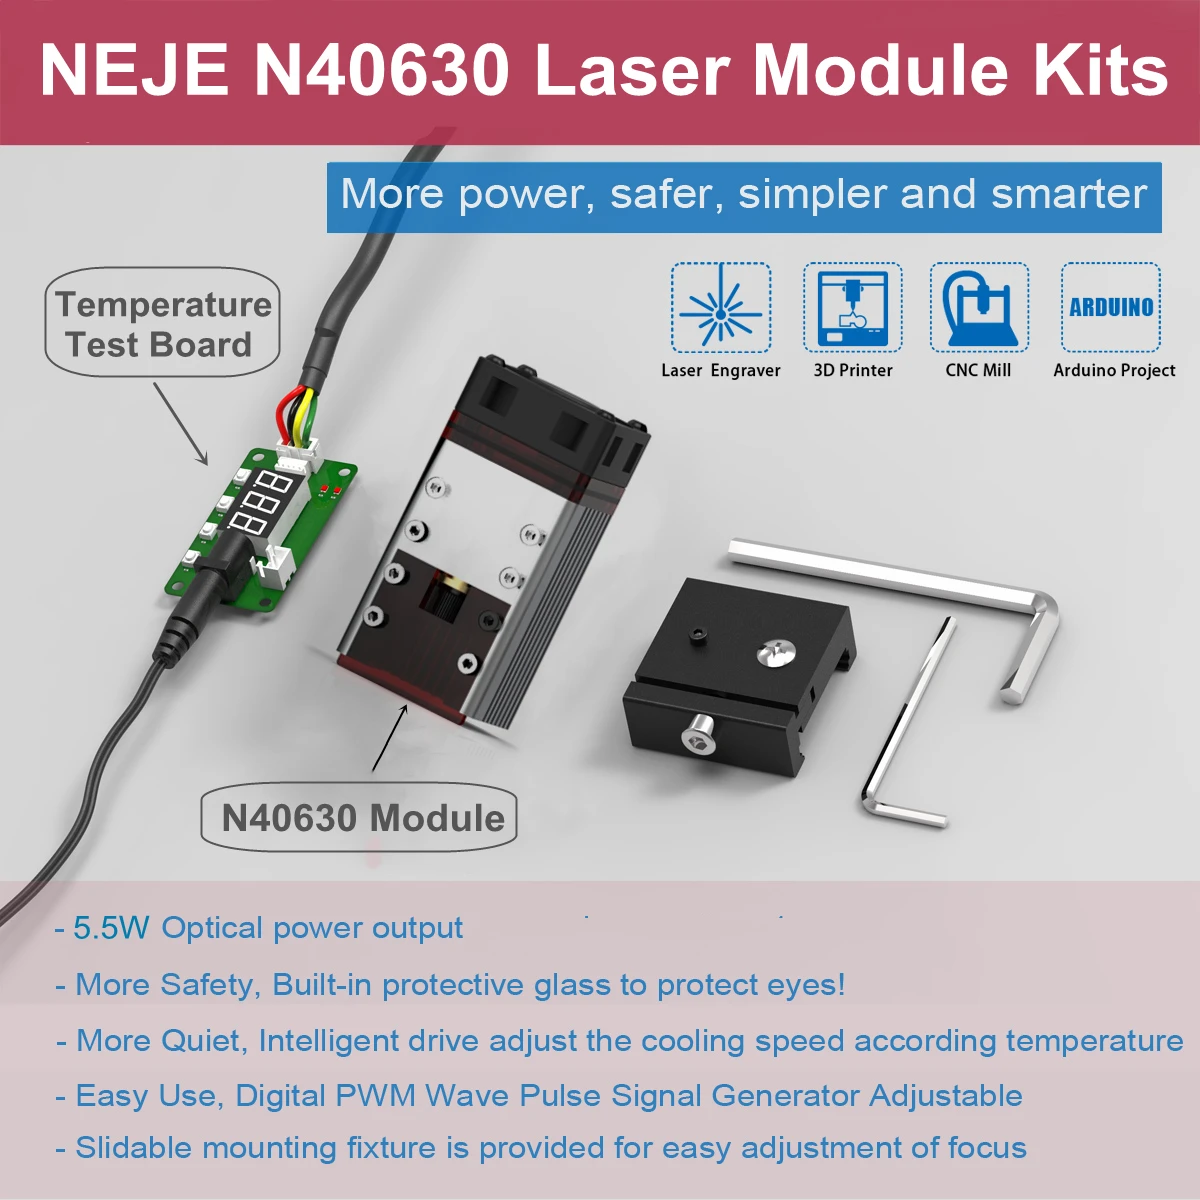 wood router table NEJE N40630 450nm Laser Module Kits 30W Blue Laser Head for Laser Engraver Wood Cutting Tool TTL/PWM Laser Module Smarter Tools wood work bench